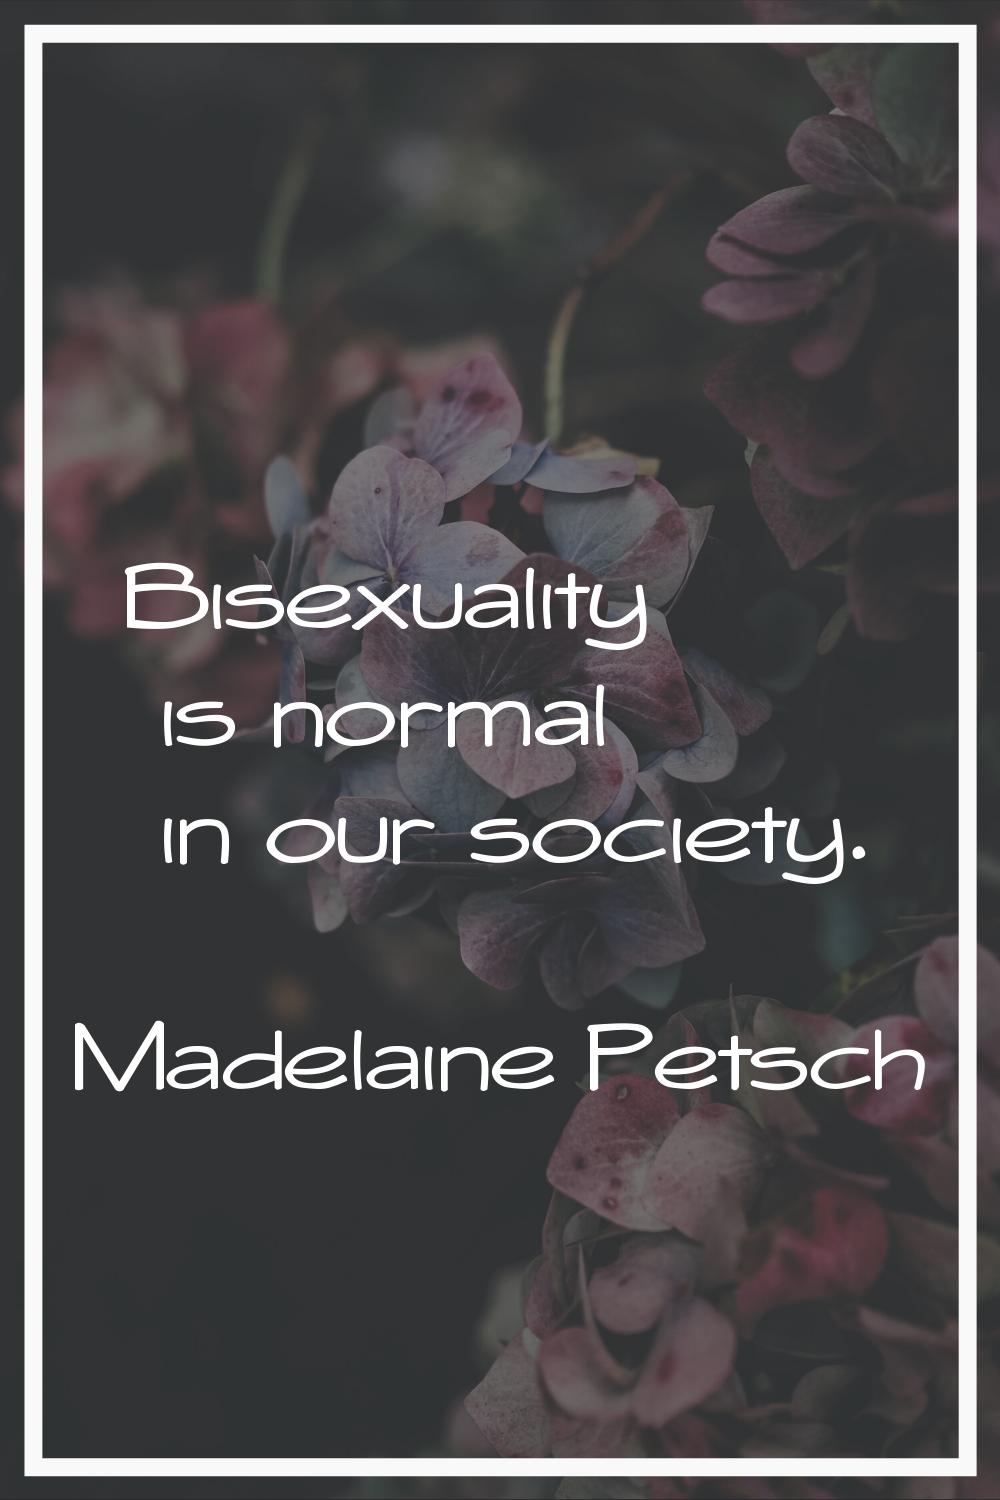 Bisexuality is normal in our society.